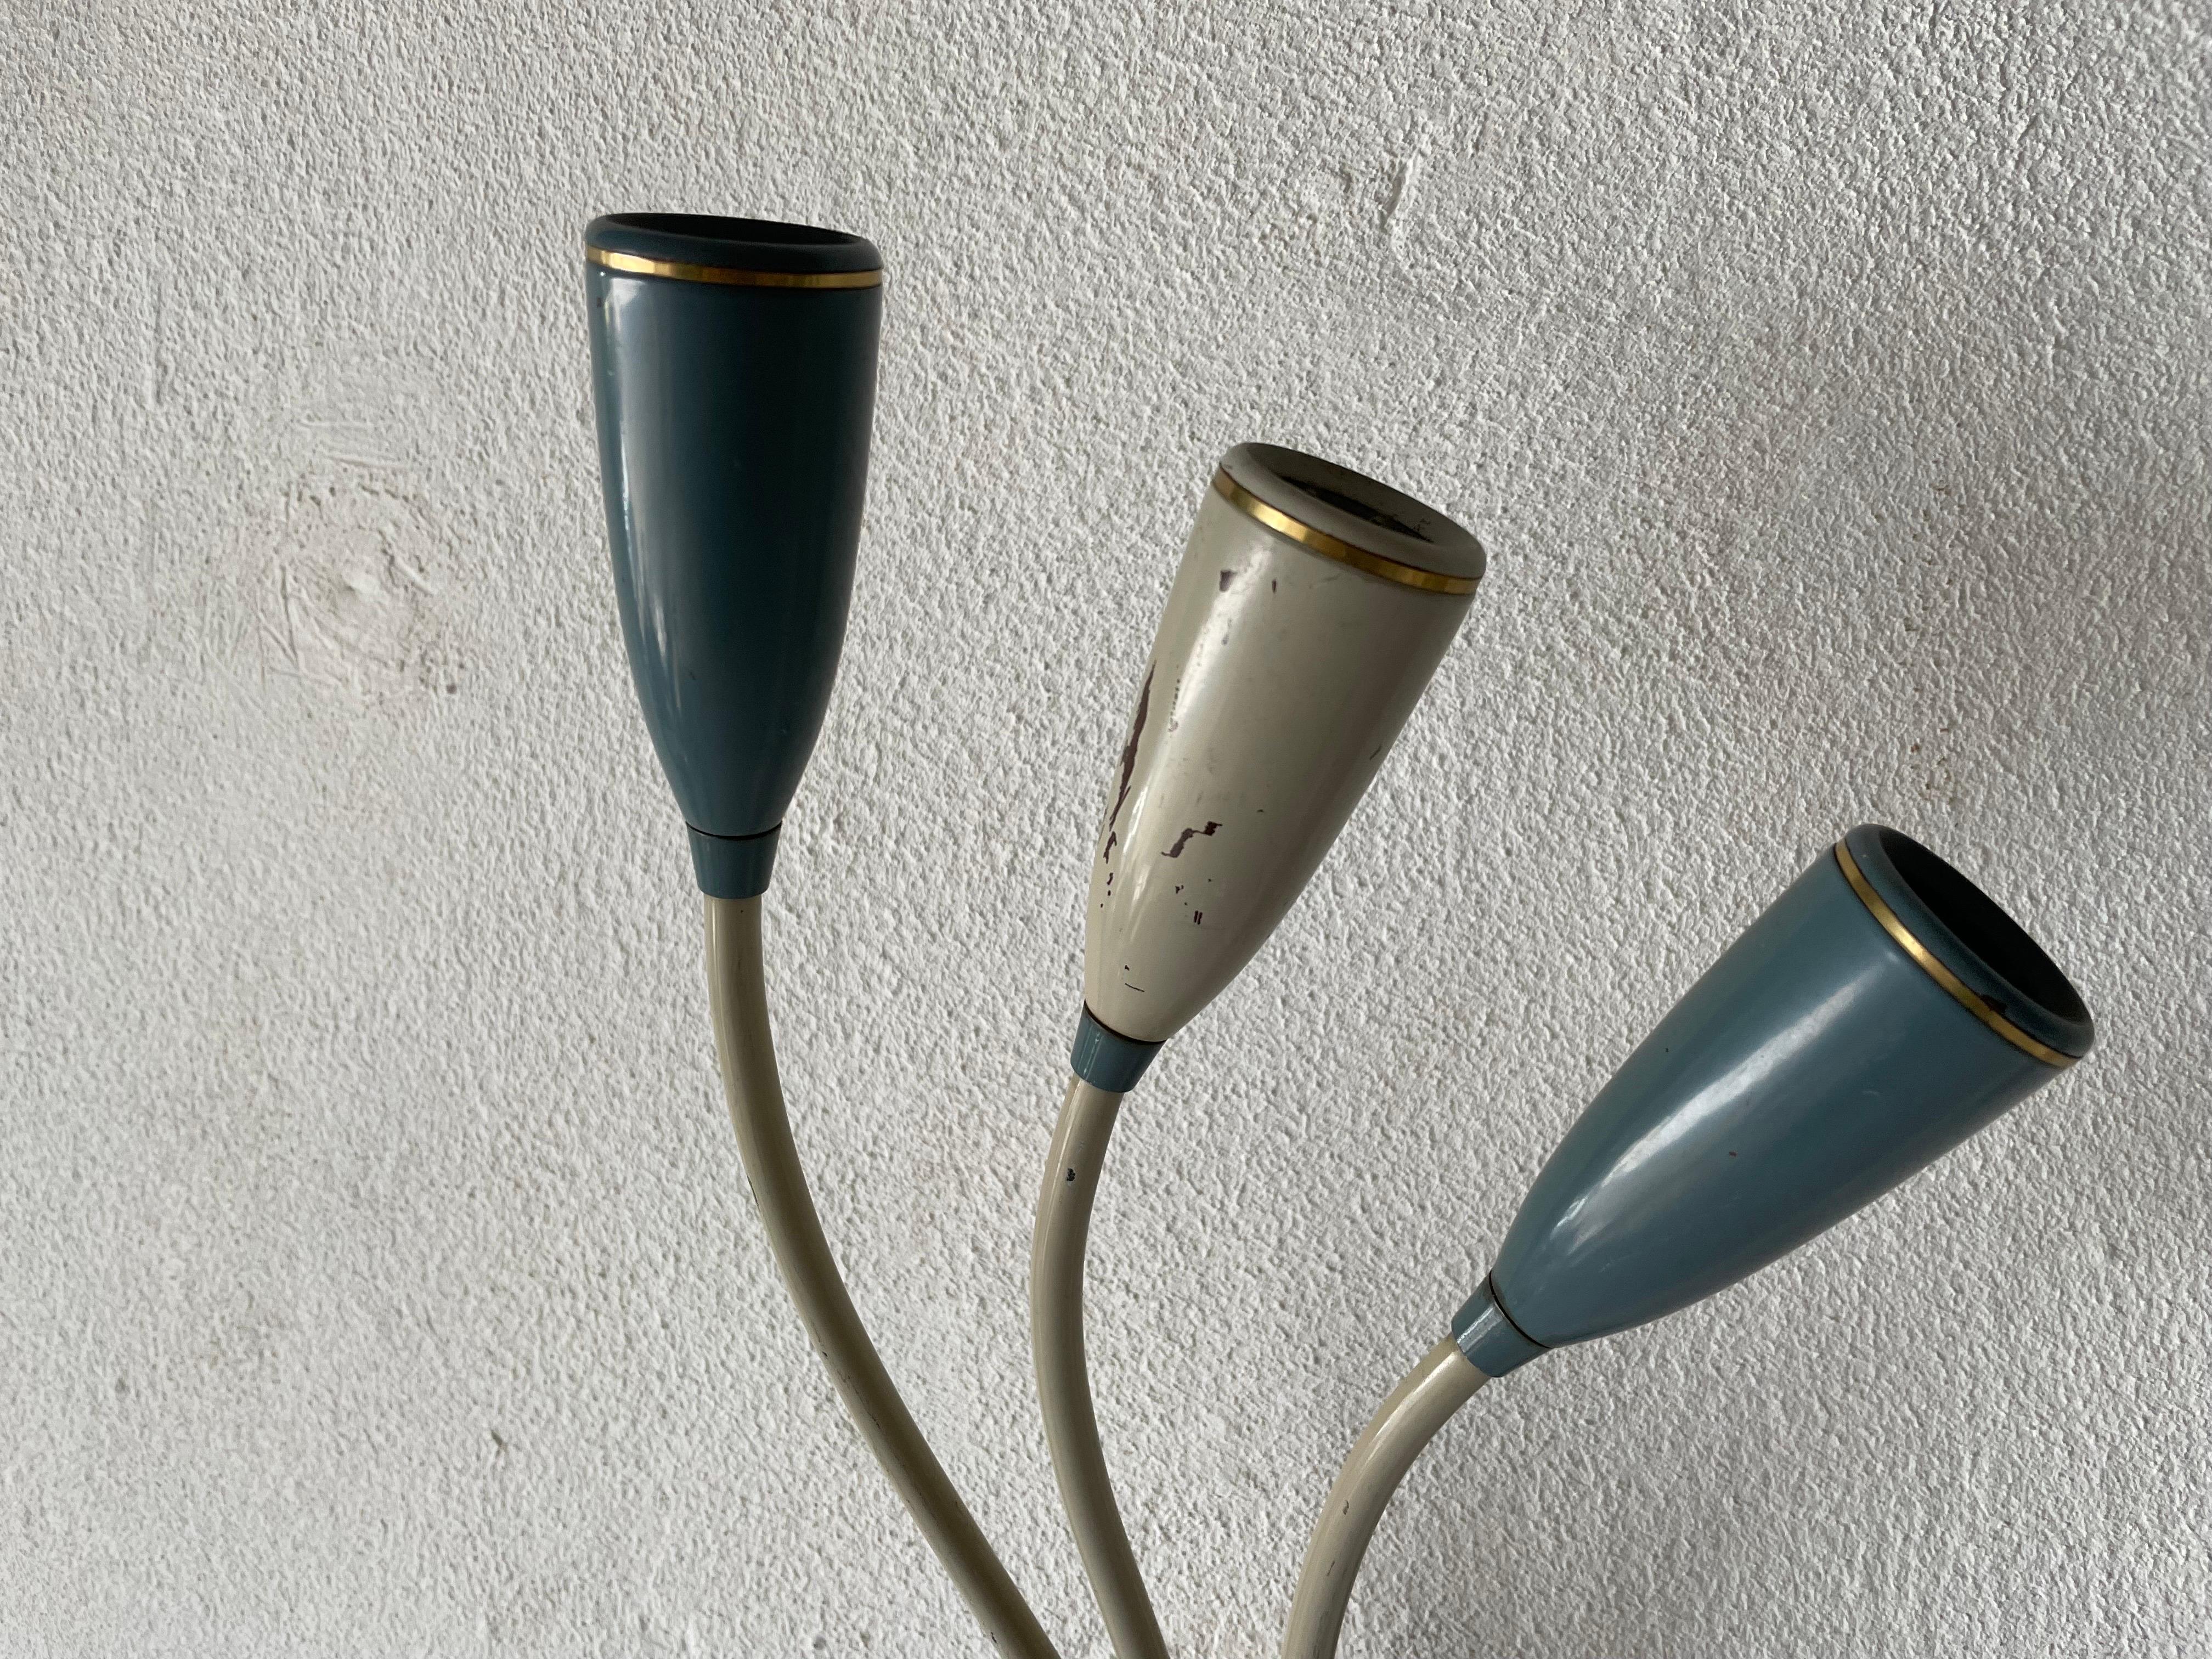 3-head Blue and White Metal Pair of Sputnik Sconces, 1950s, Germany For Sale 2